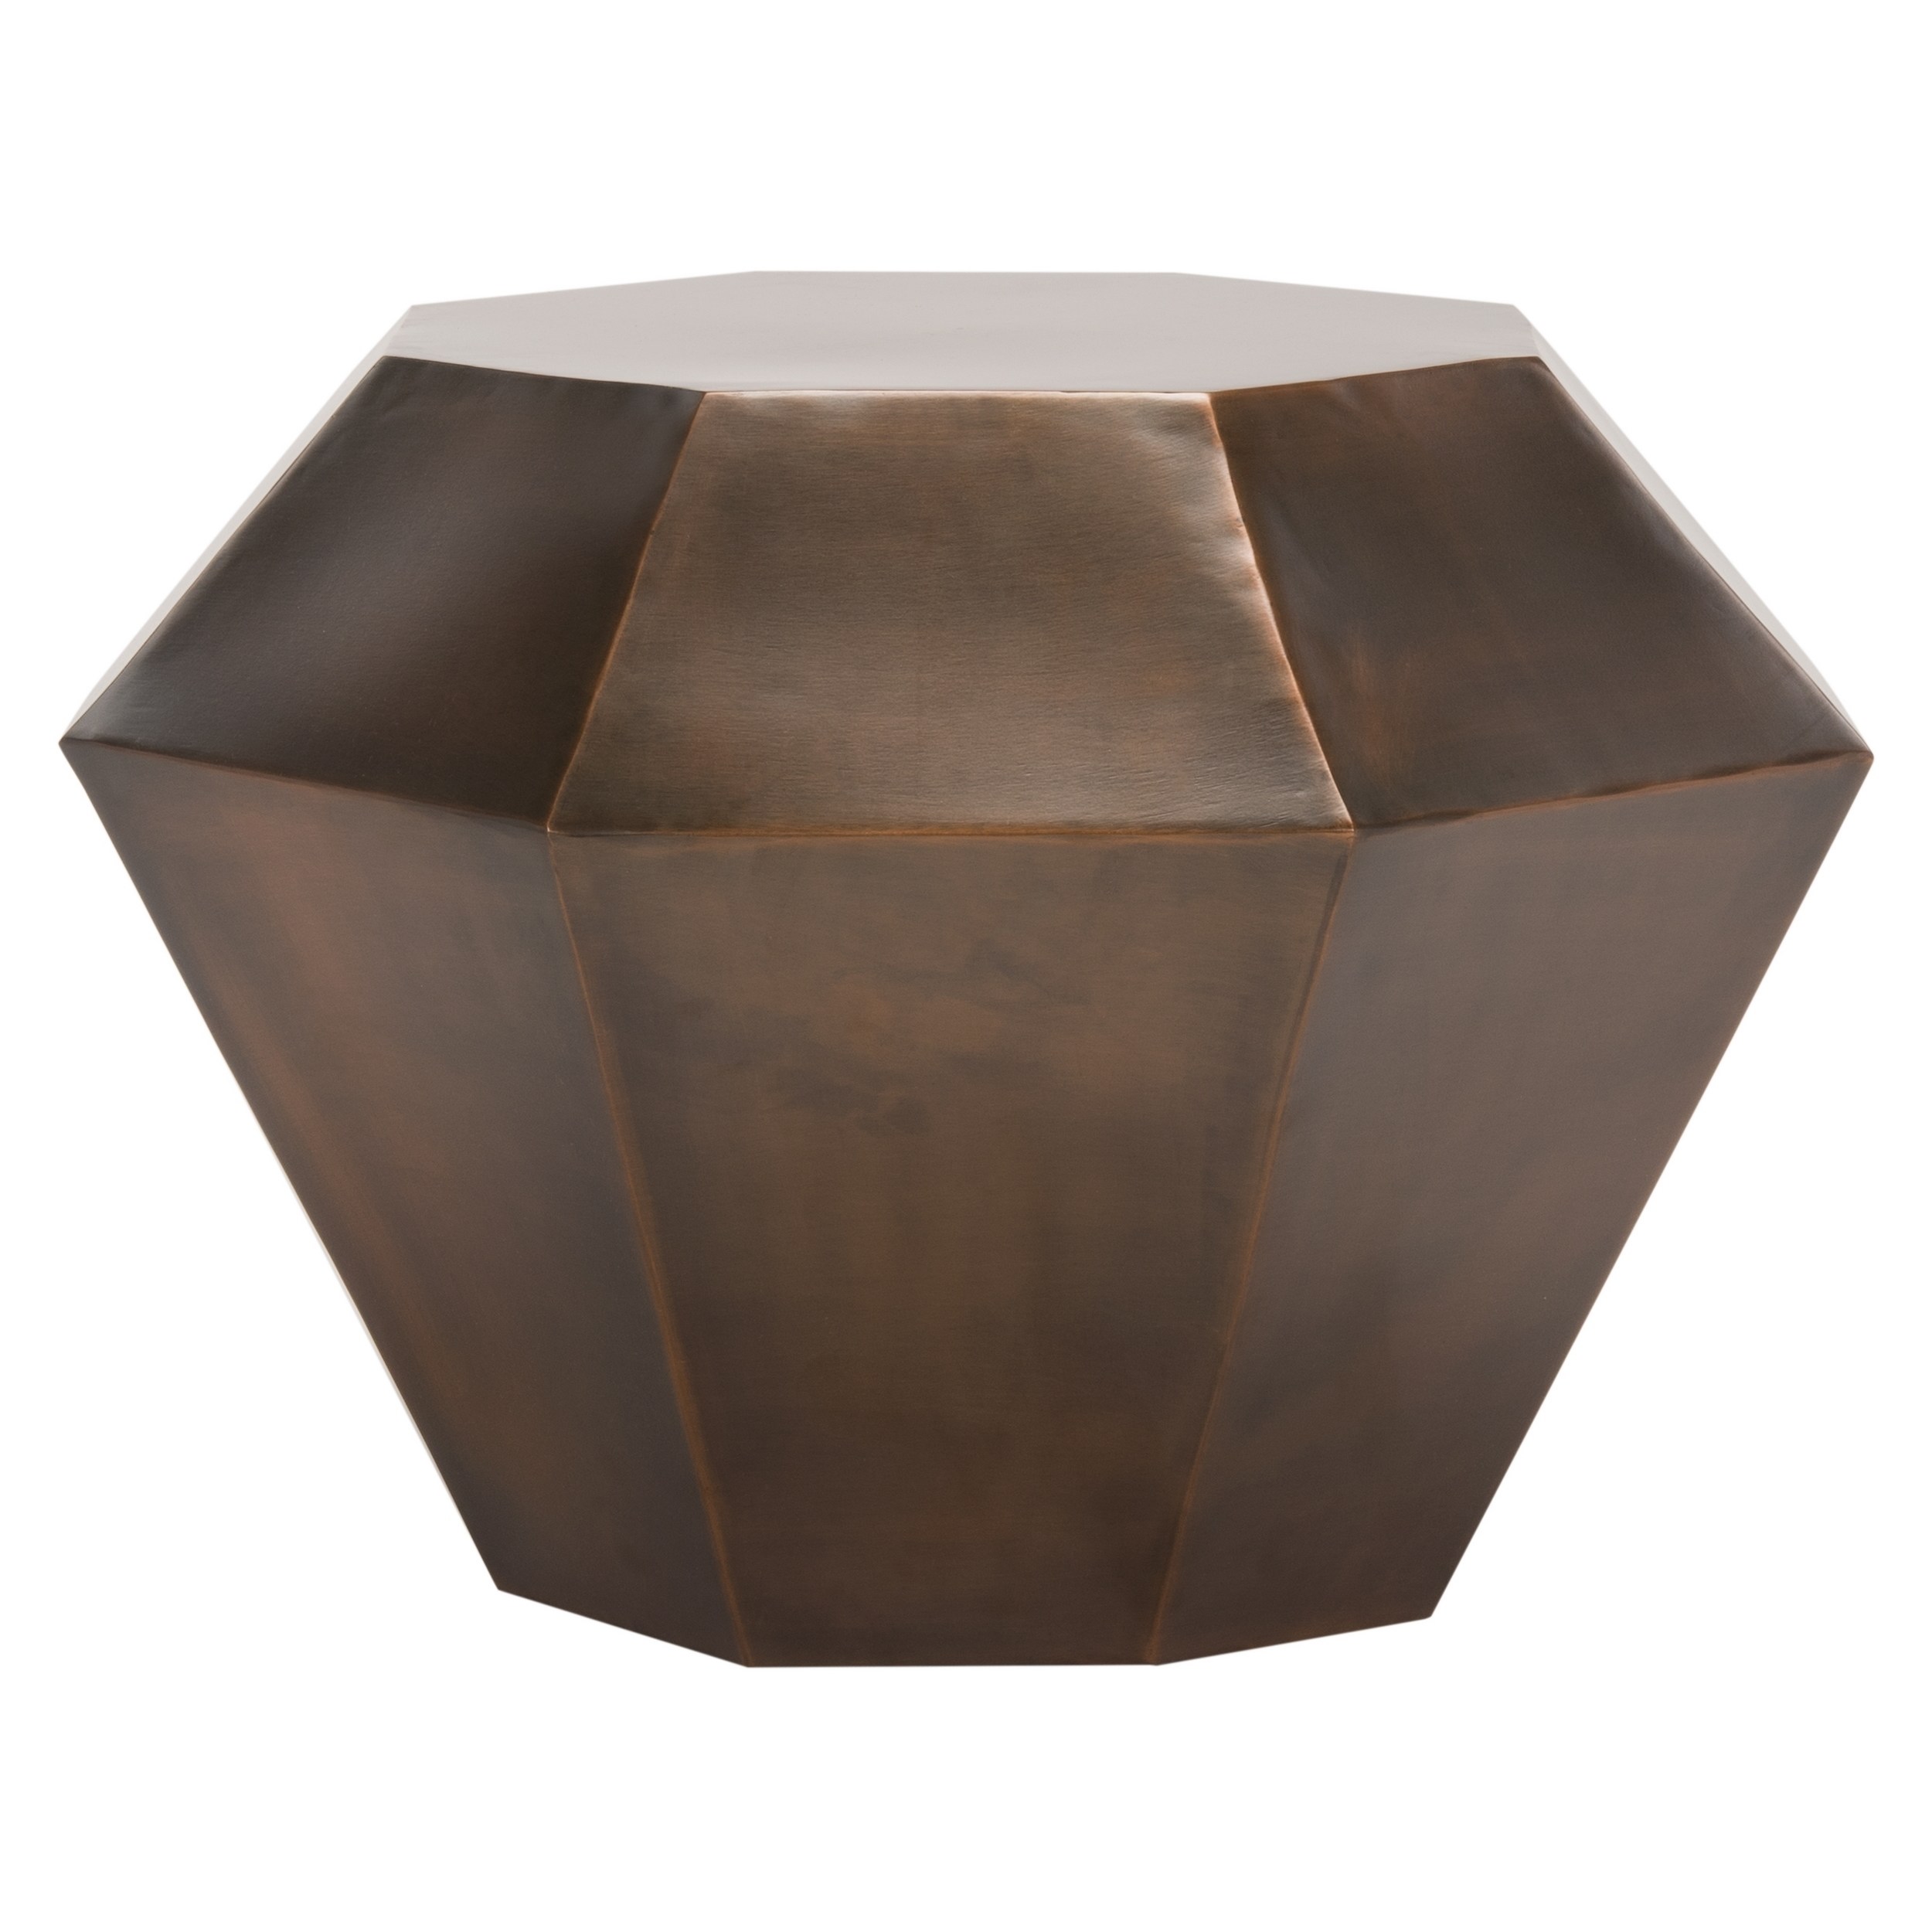 copper accent table threshold zhuxing patina rusted safavieh grace diamond antique rustic outside patio side tables coffee and chairs piece round set bathroom vanity pottery barn